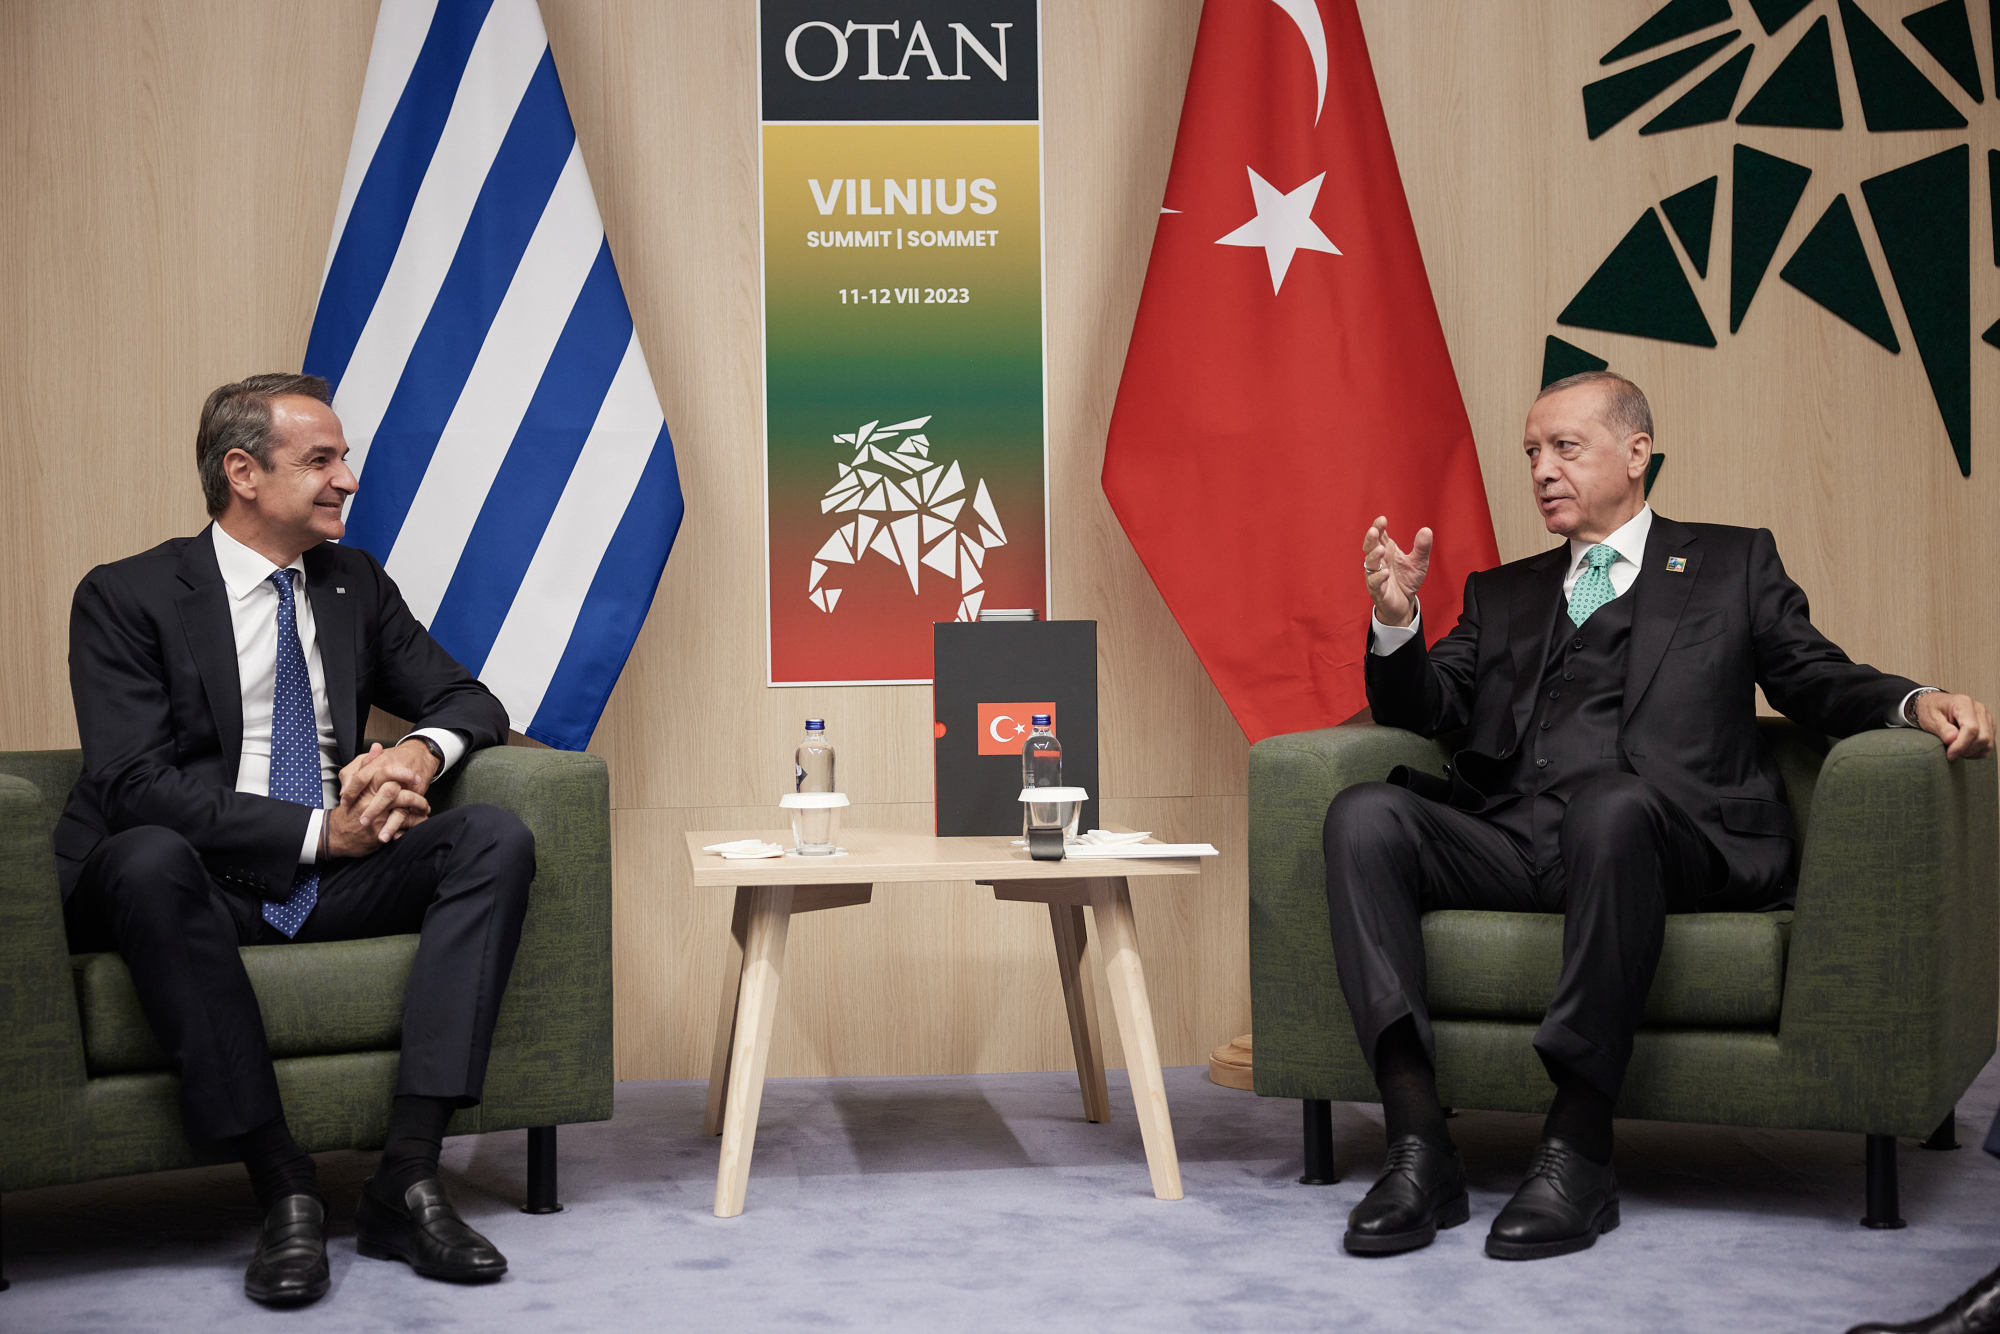 Mitsotakis and Erdogan “pressured” the resumption of Greek-Turkish relations – the three axes of cooperation